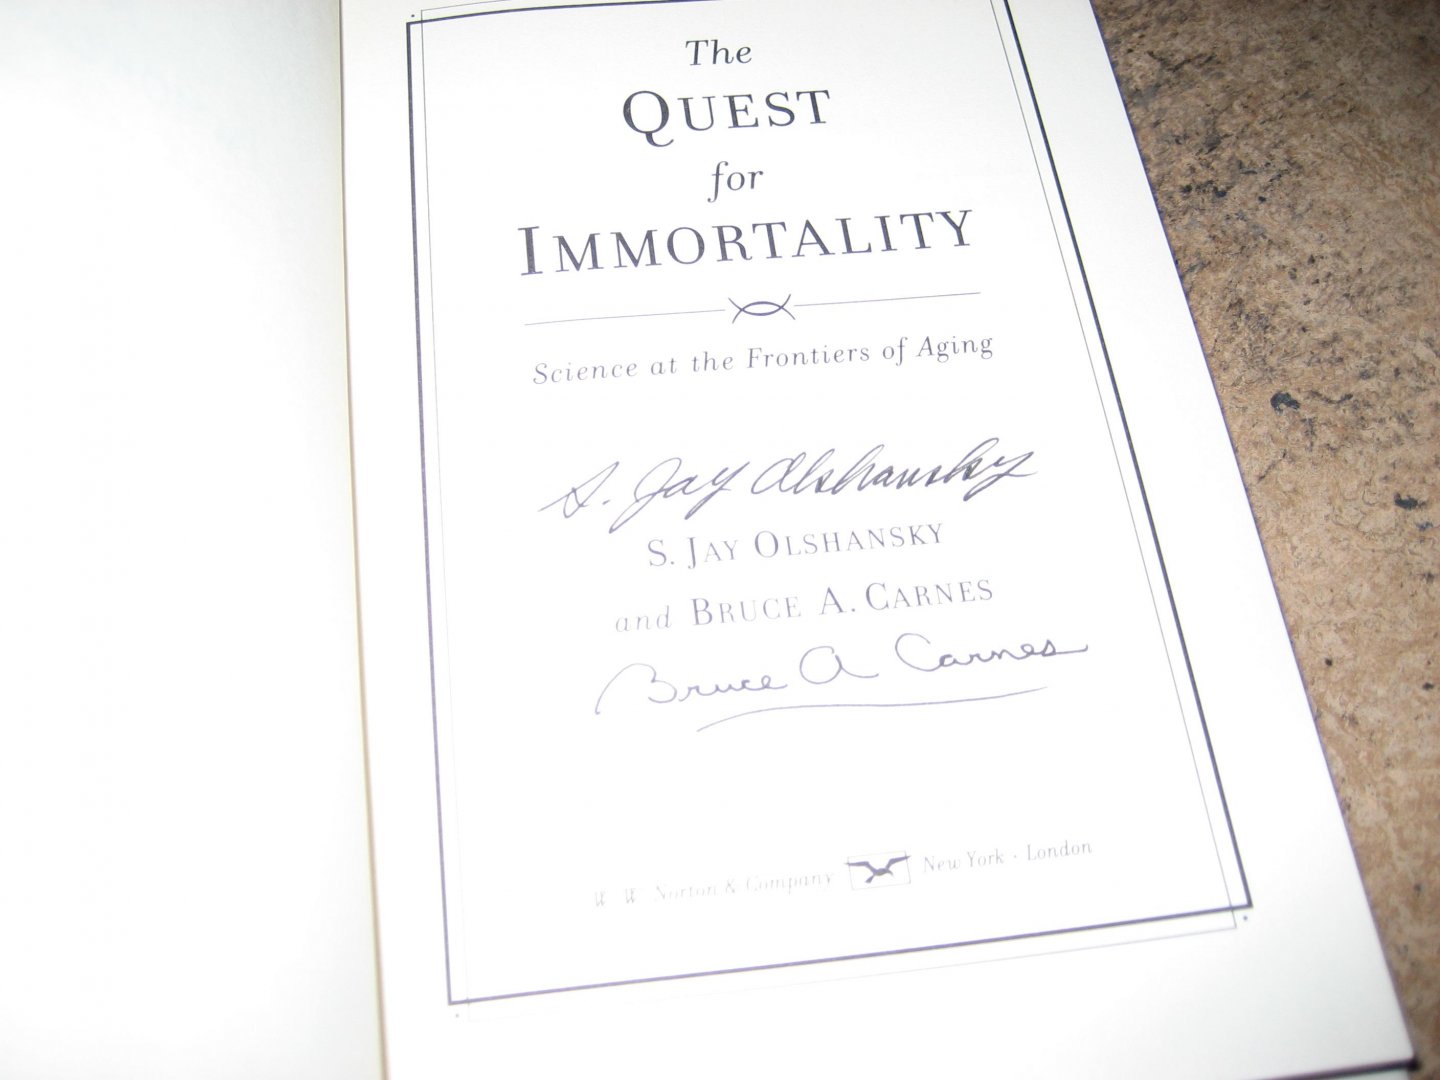 Olshansky, S. Jay | Bruce A. Carnes - The Quest for Immortality - Science at the Frontiers of Aging